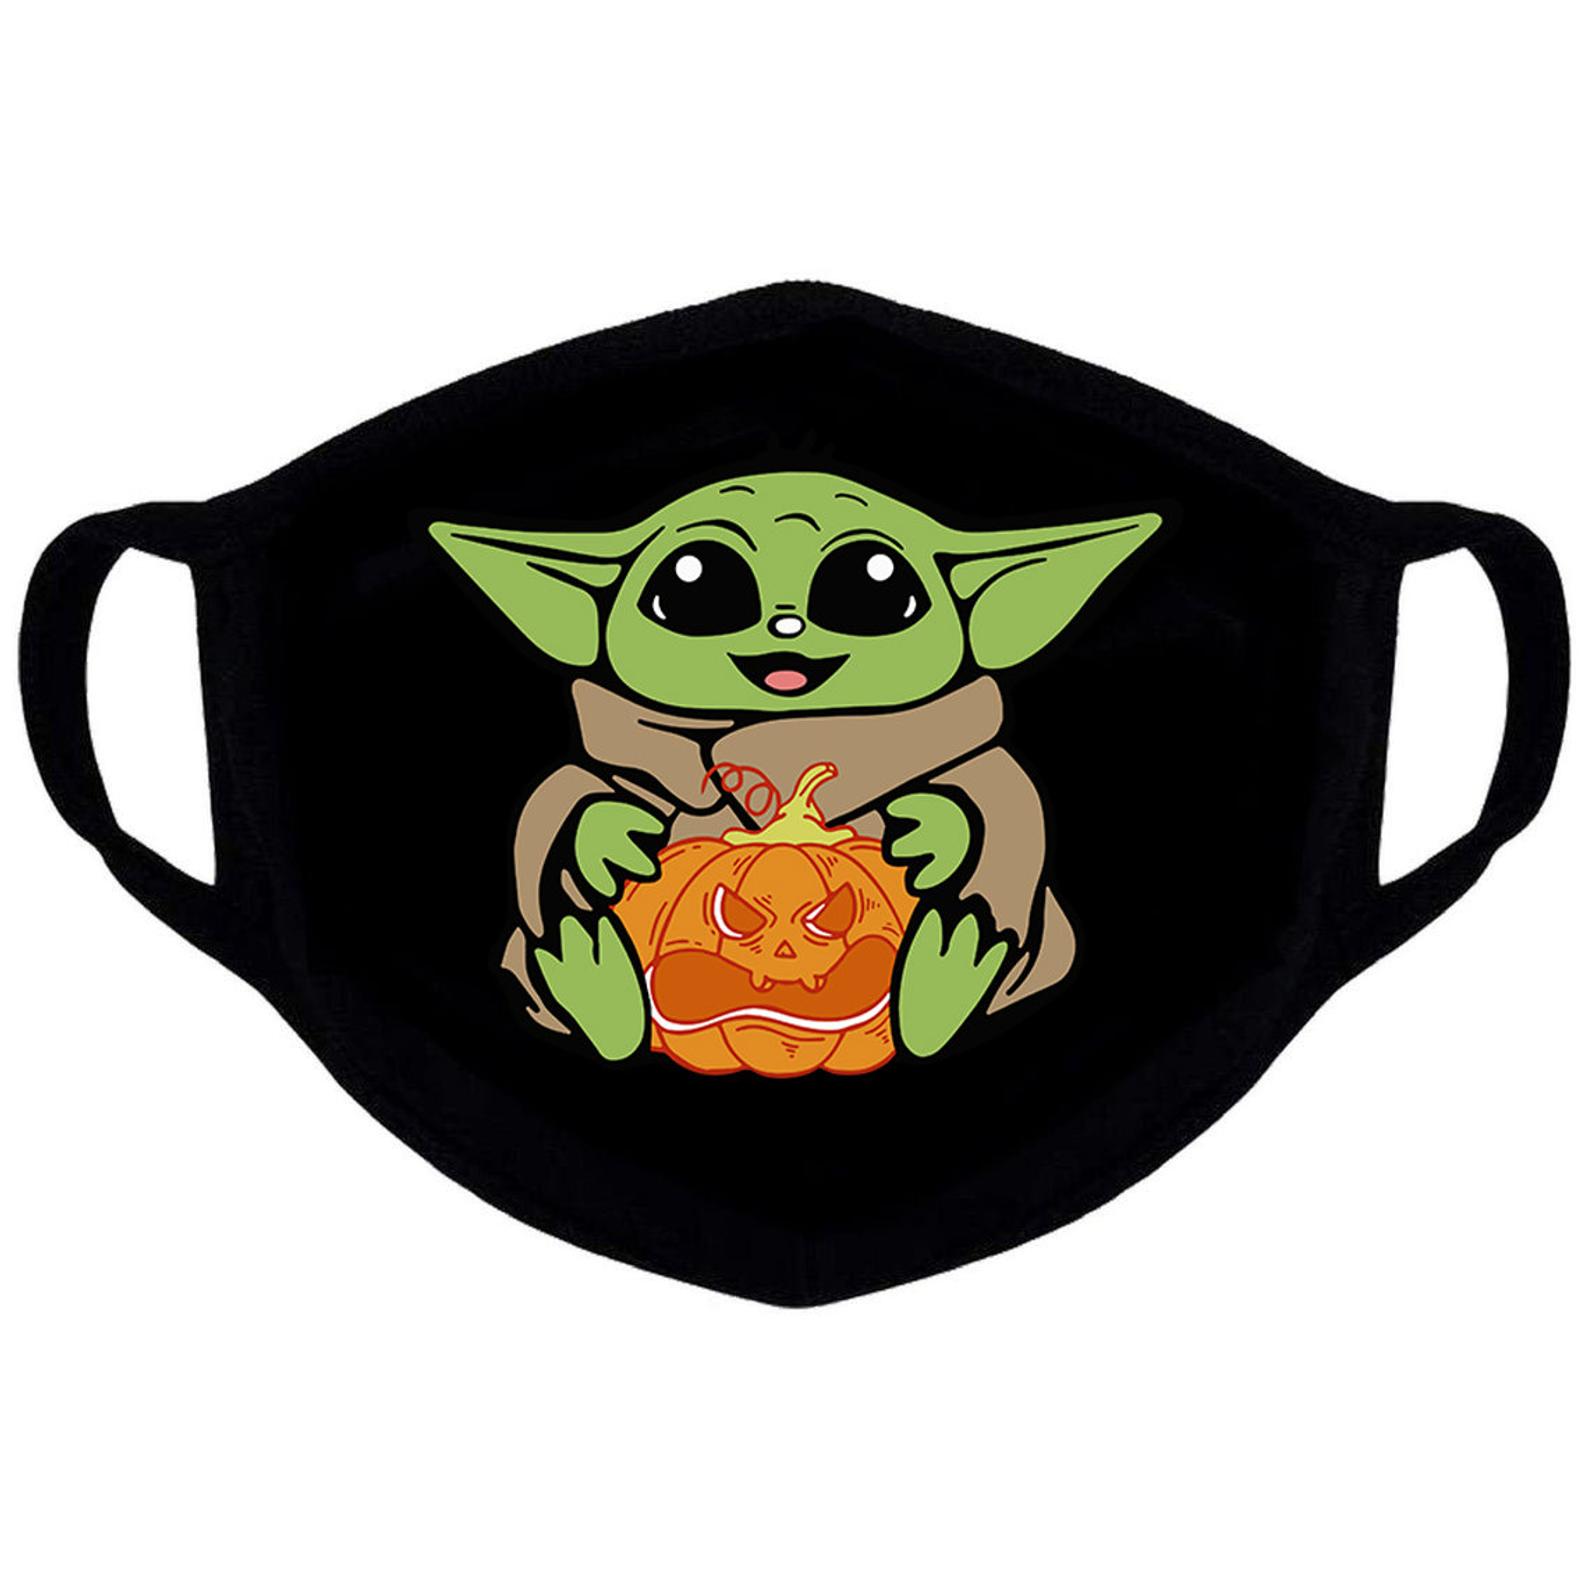 Halloween face masks for kids: Baby Yoda Halloween mask at Creation by Aris